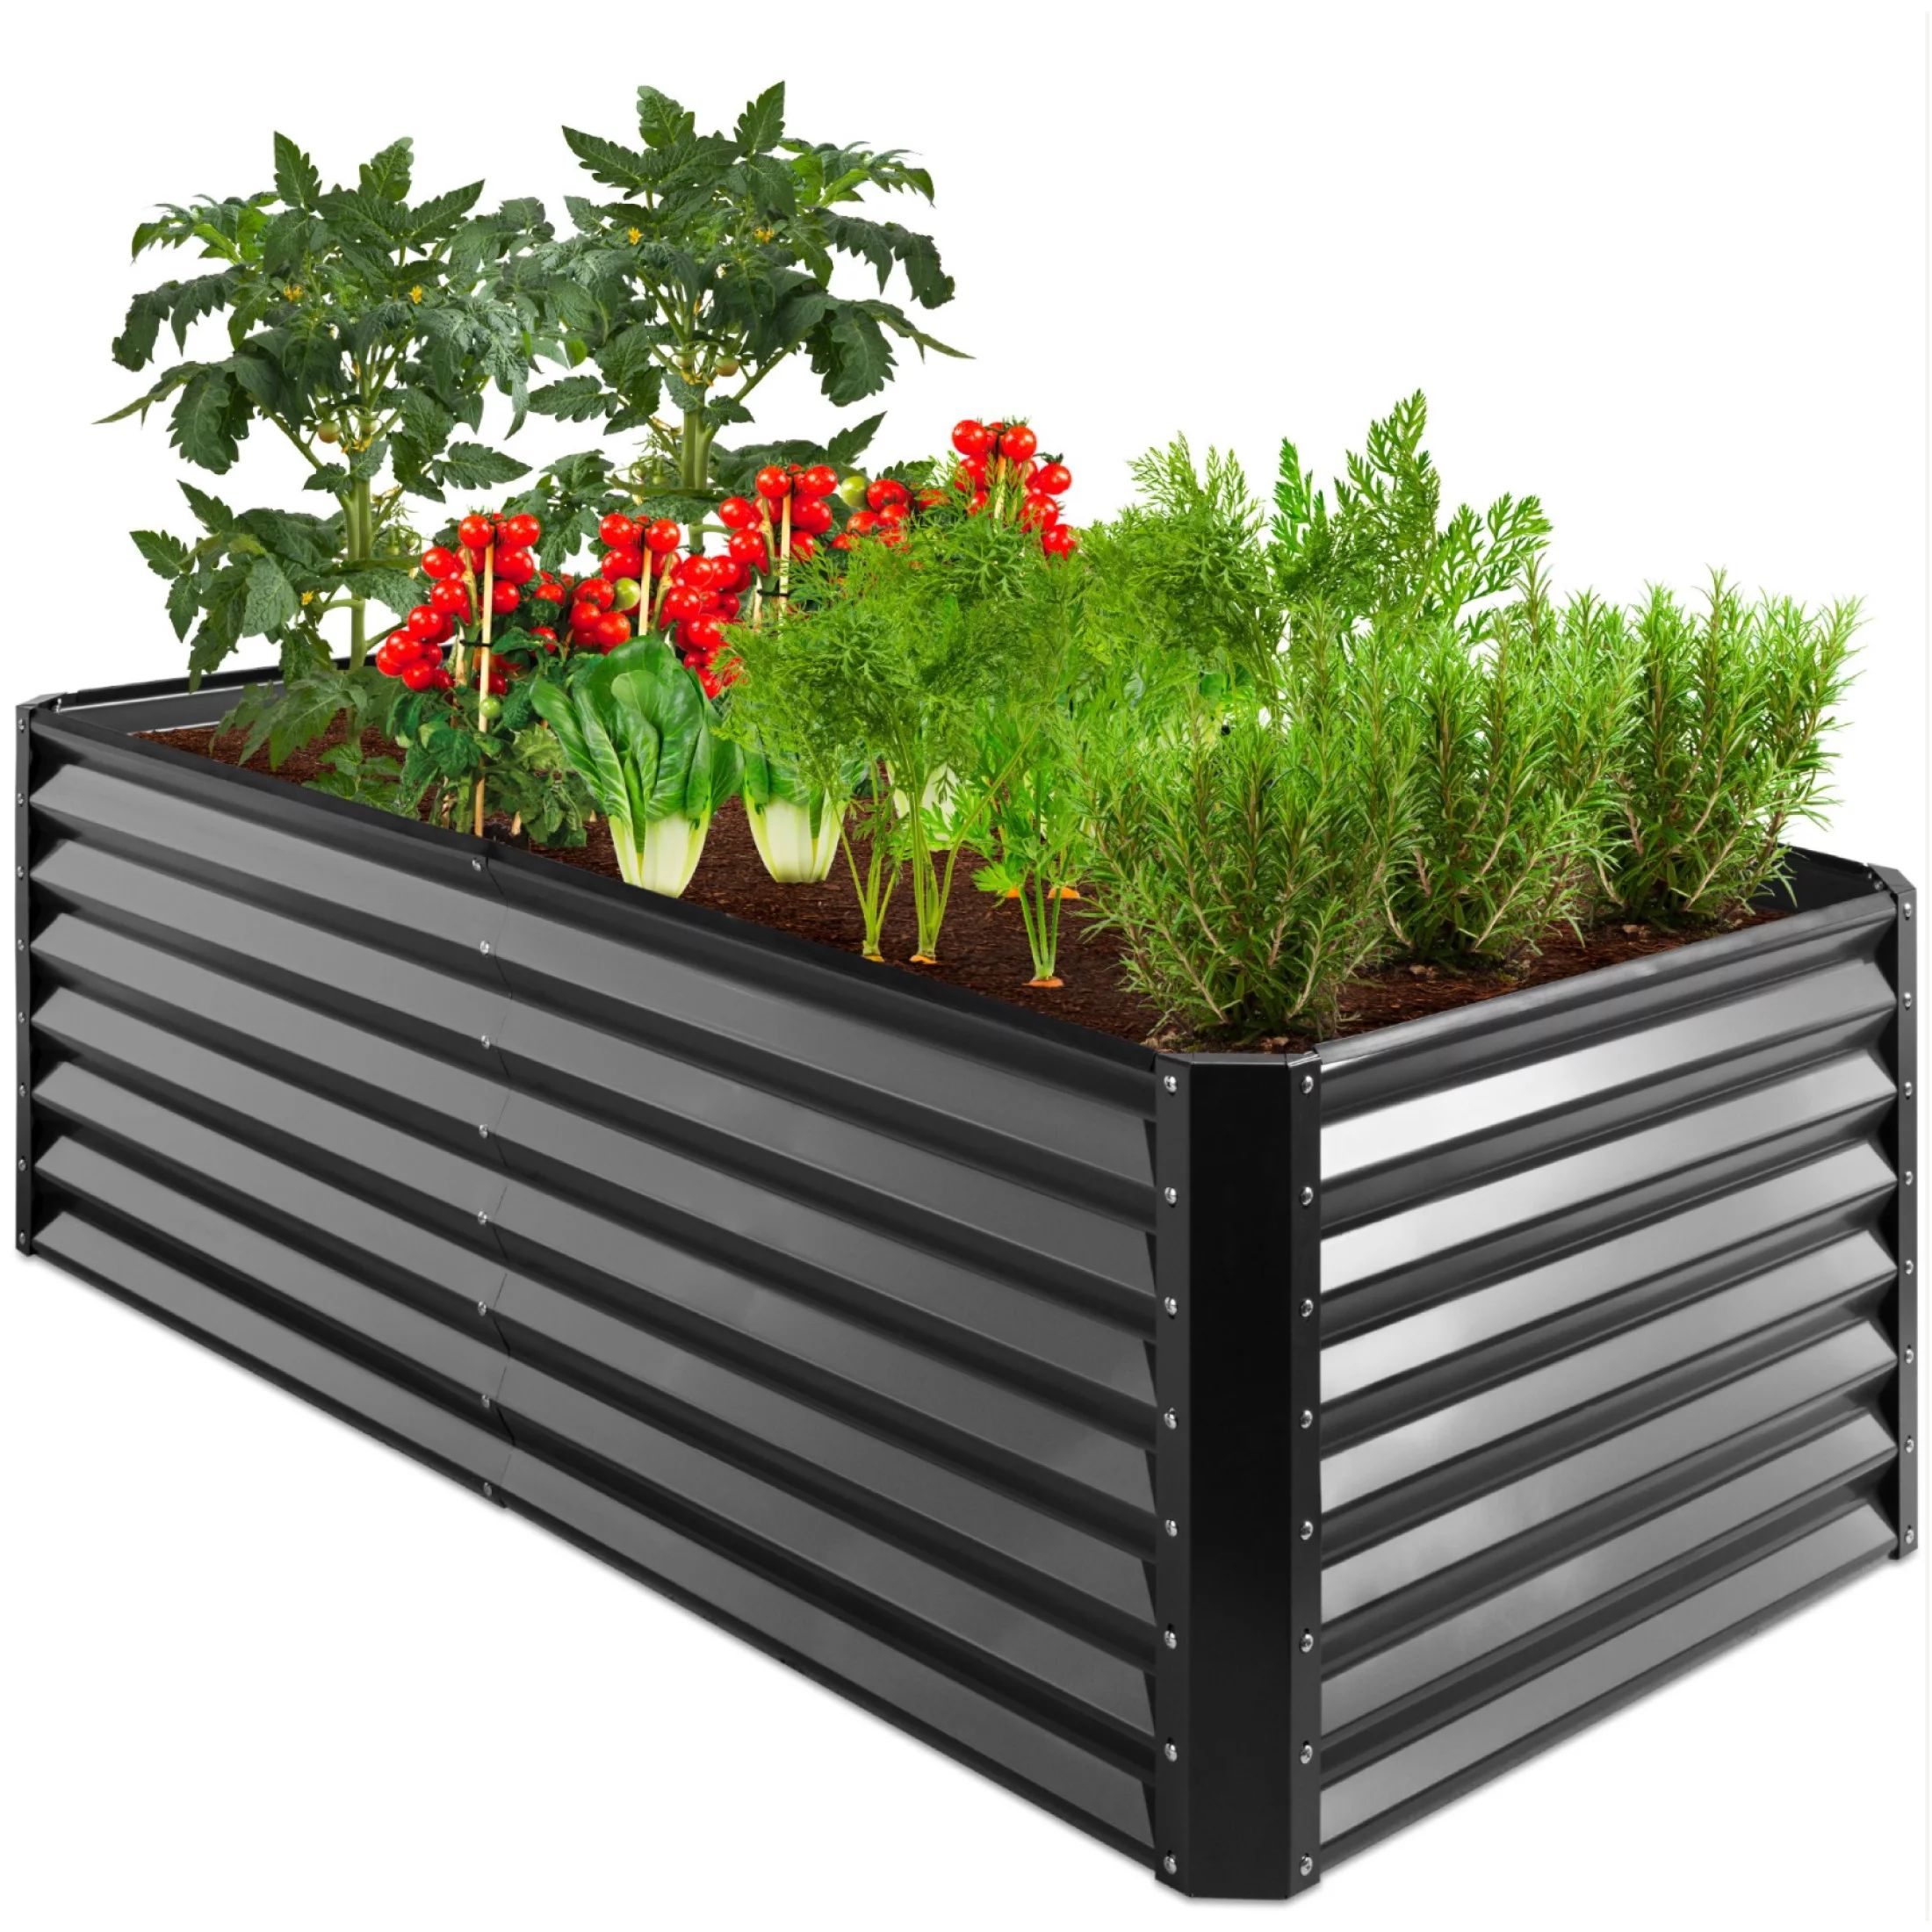 Best Choice Products 6x3x2ft Outdoor Metal Raised Garden Bed, Planter Box for Vegetables, Flowers... | Walmart (US)